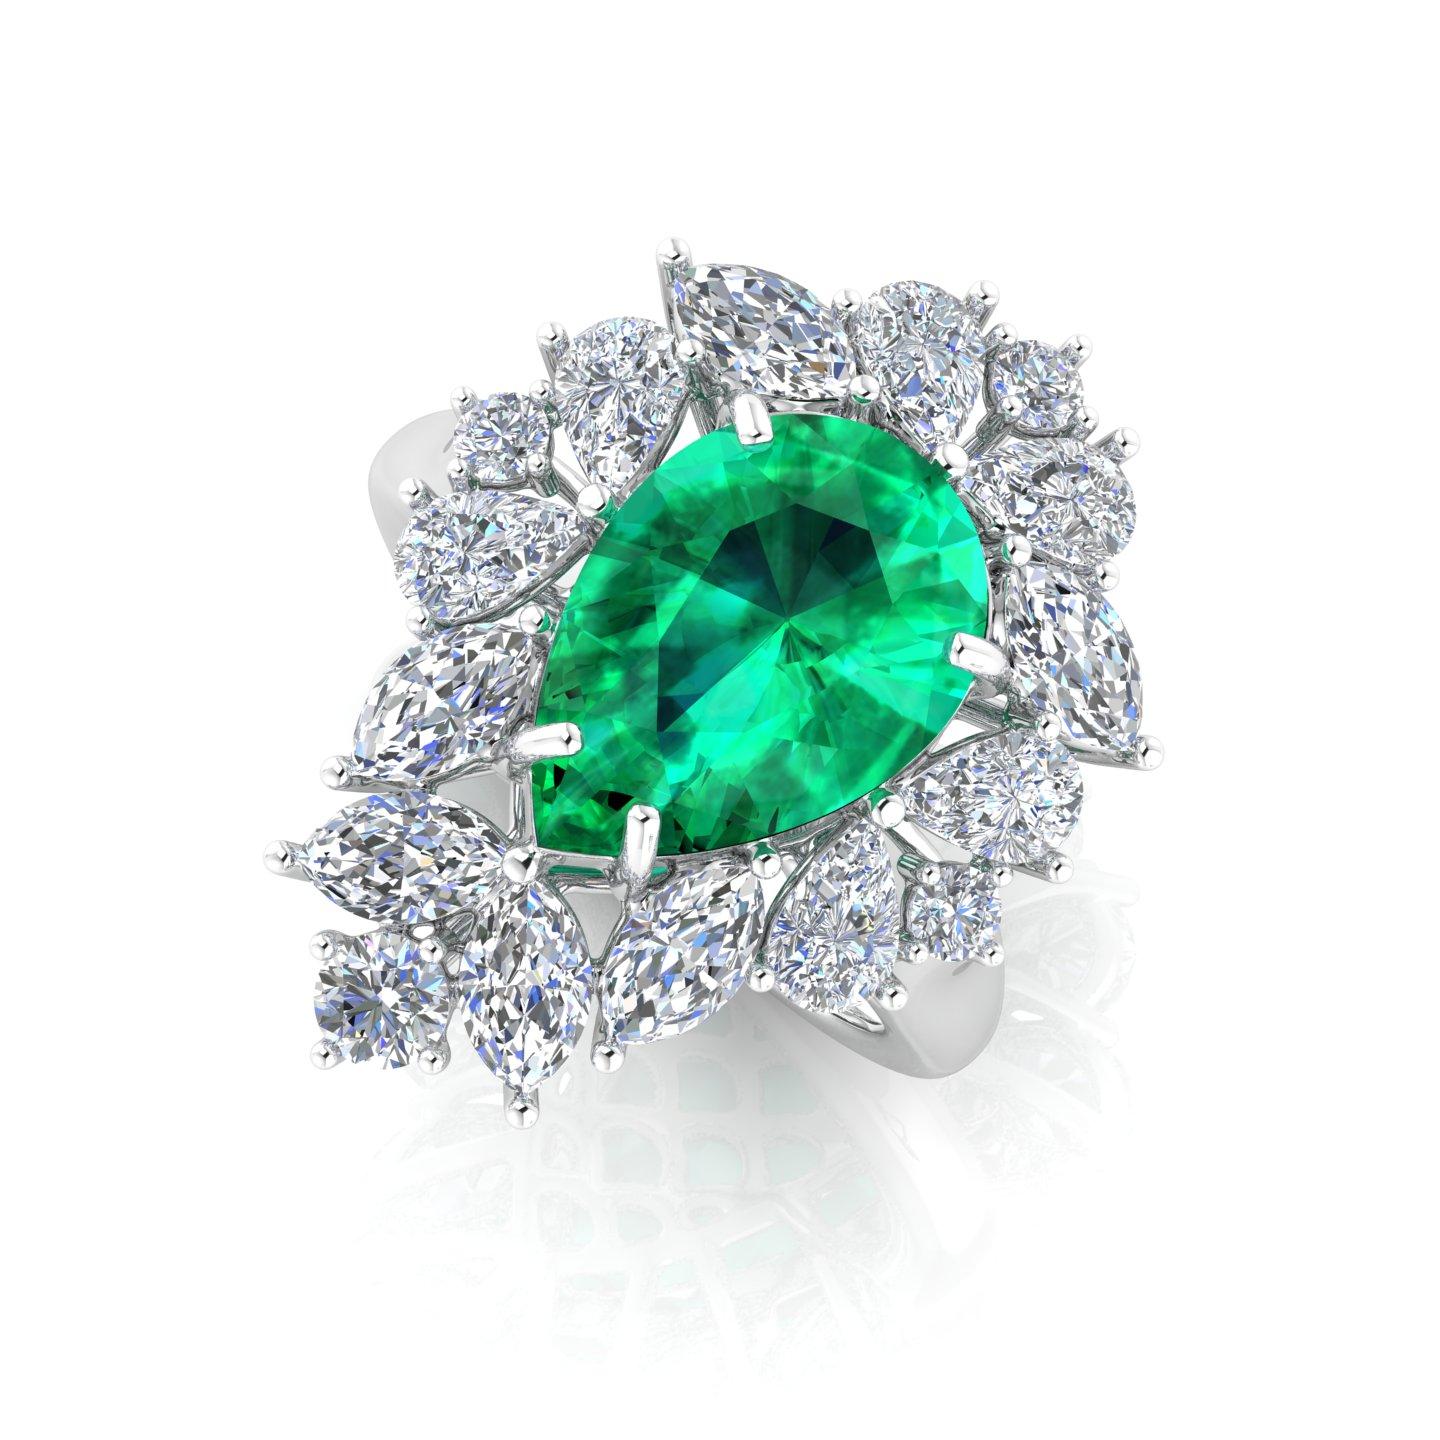 For Sale:  Pear Natural Emerald Gemstone Ring Diamond Solid 18k White Gold Fine Jewelry 8